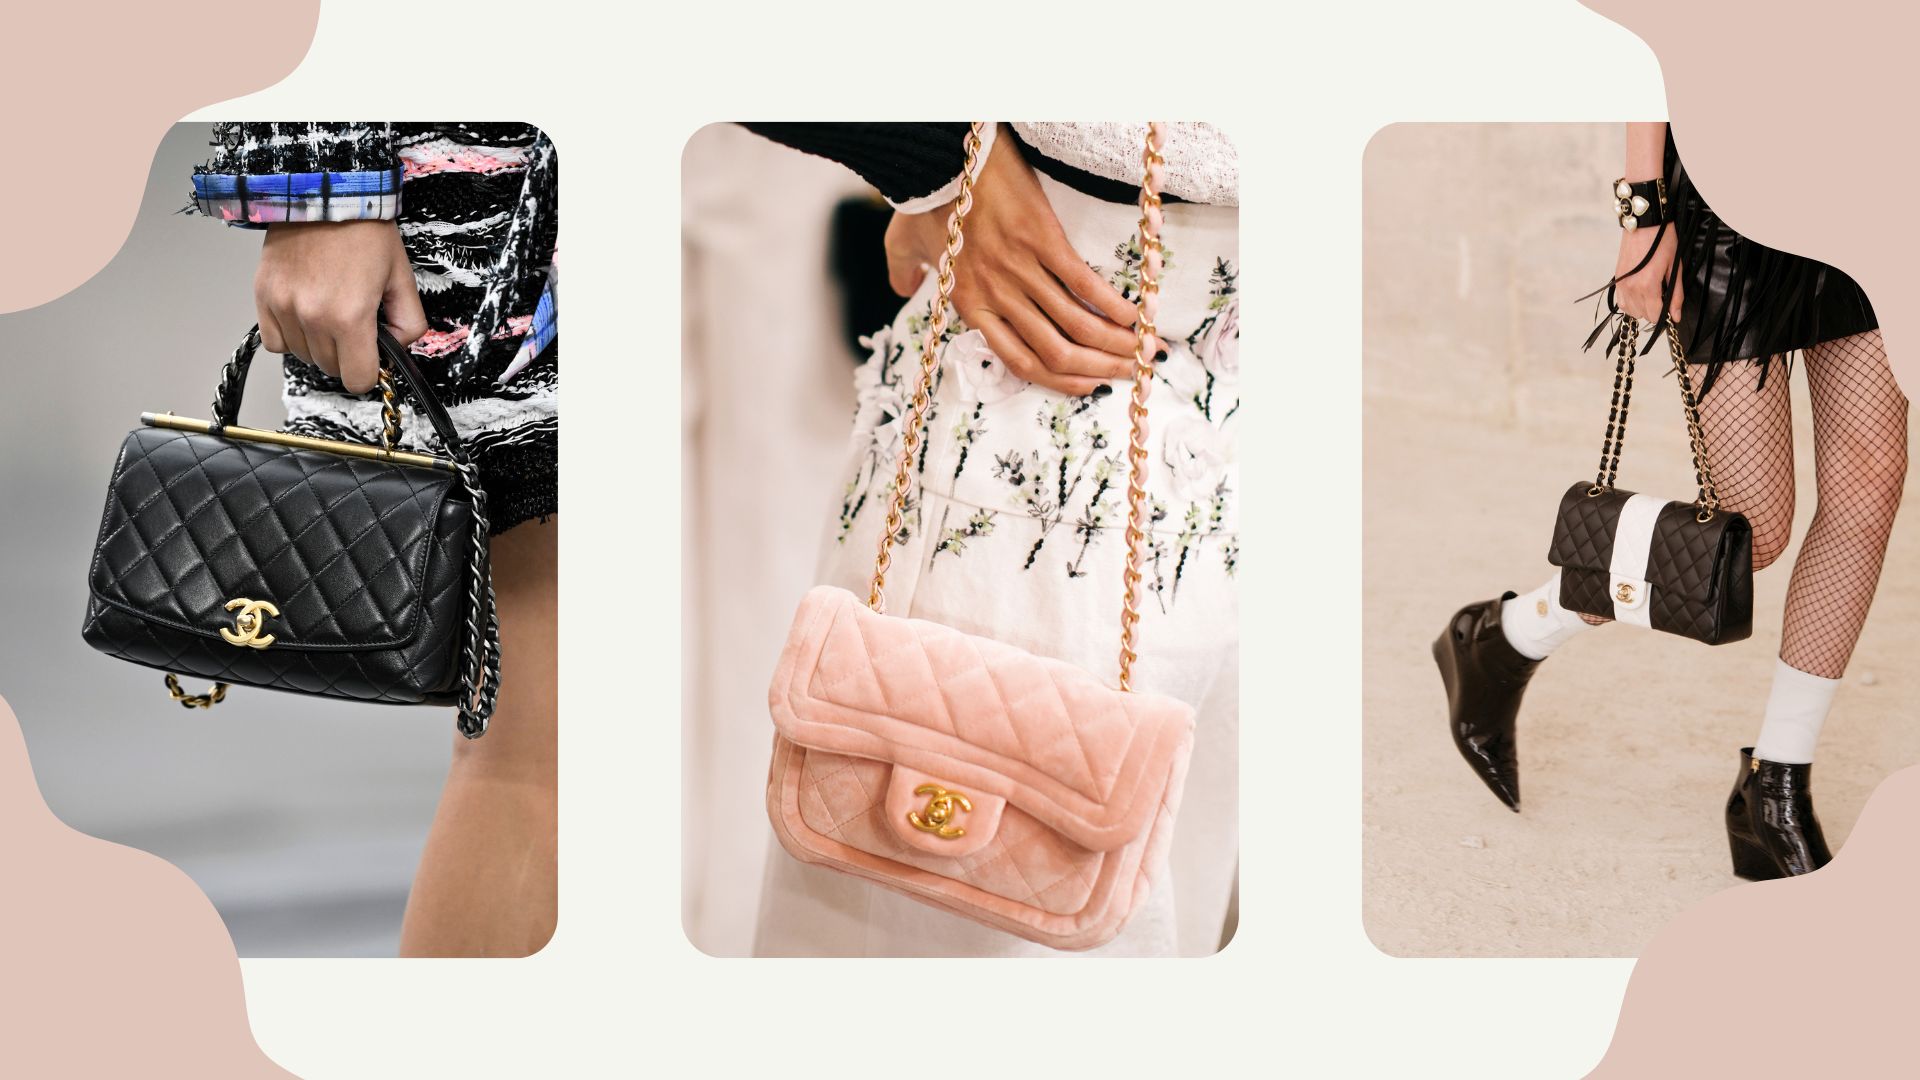 Classic Chanel Handbags To Invest In In 2021—From the 2.55 to the